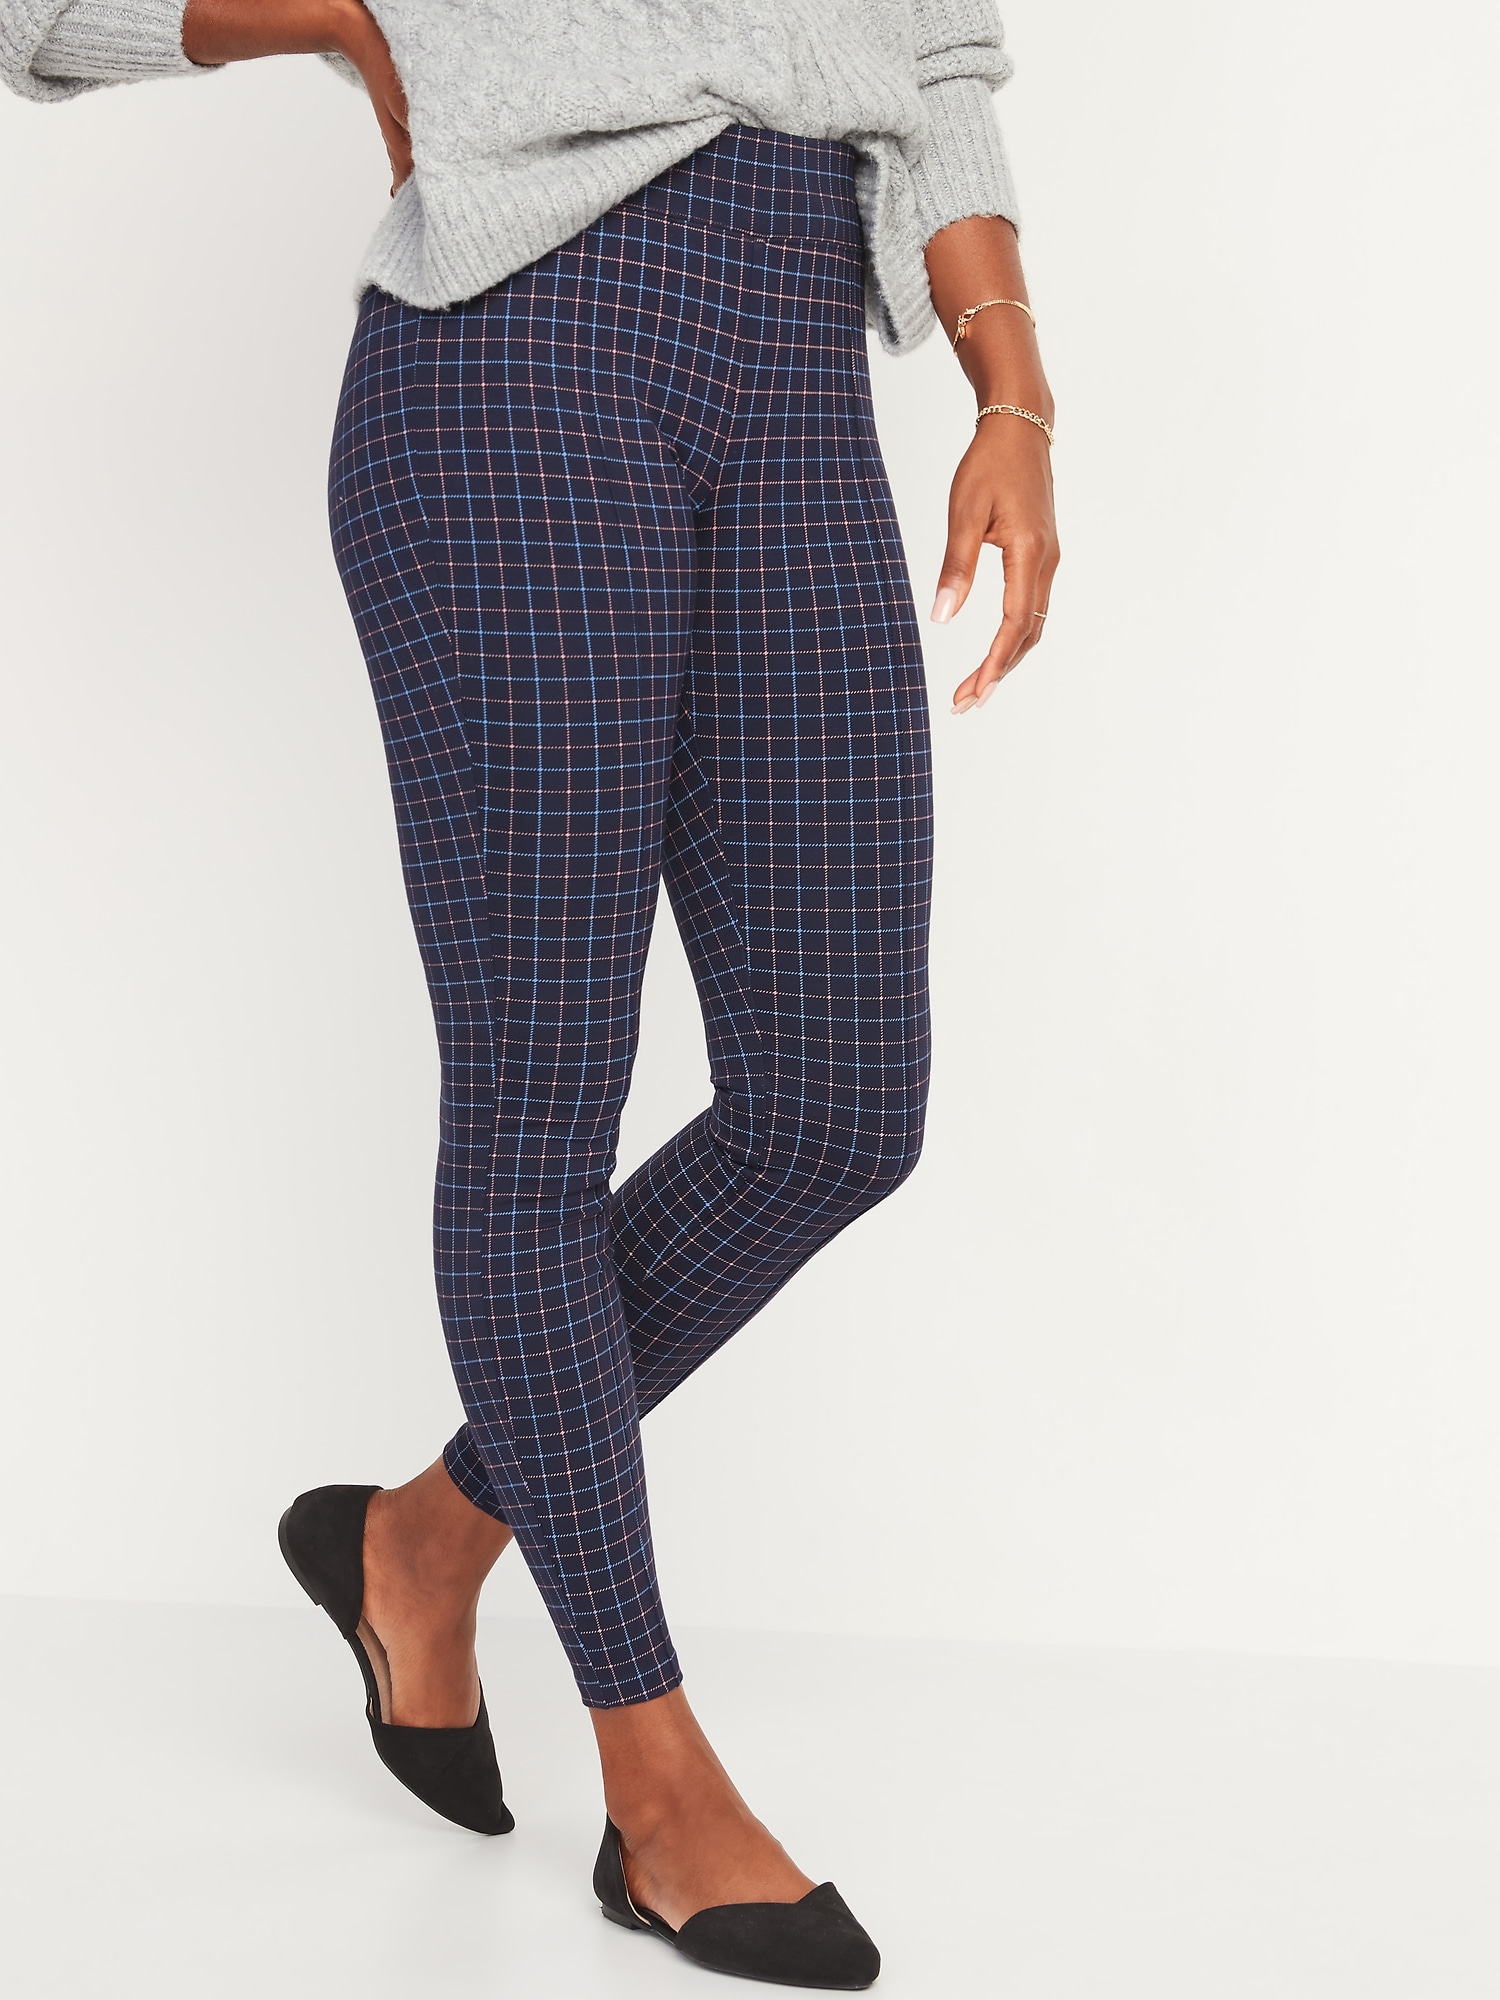 High-Waisted Stevie Pintucked Patterned Pants for Women